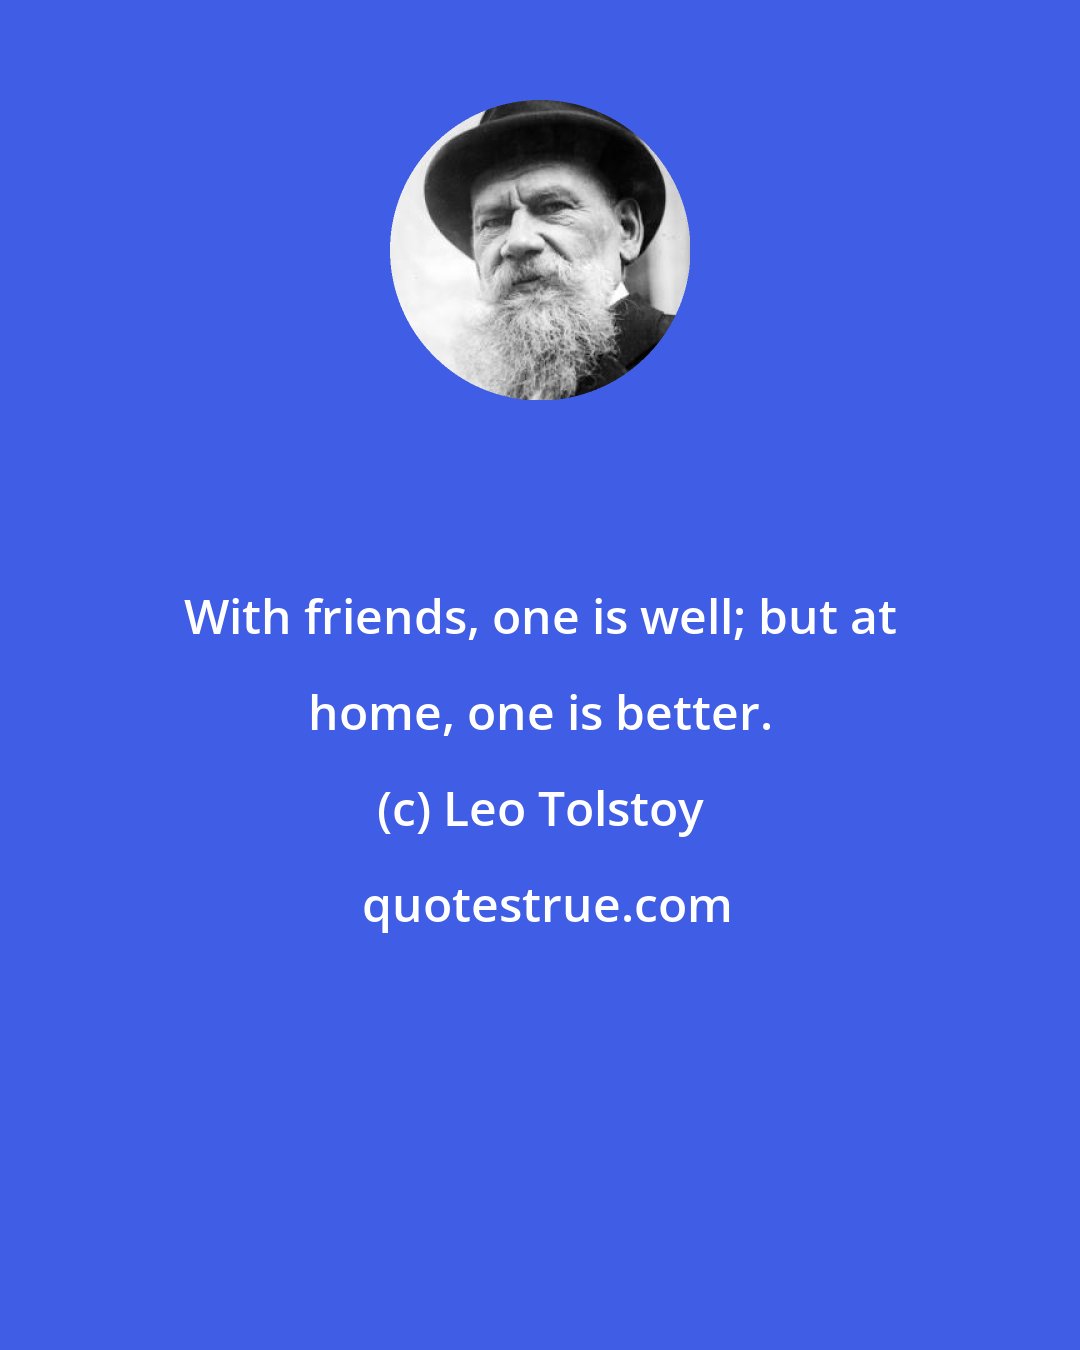 Leo Tolstoy: With friends, one is well; but at home, one is better.